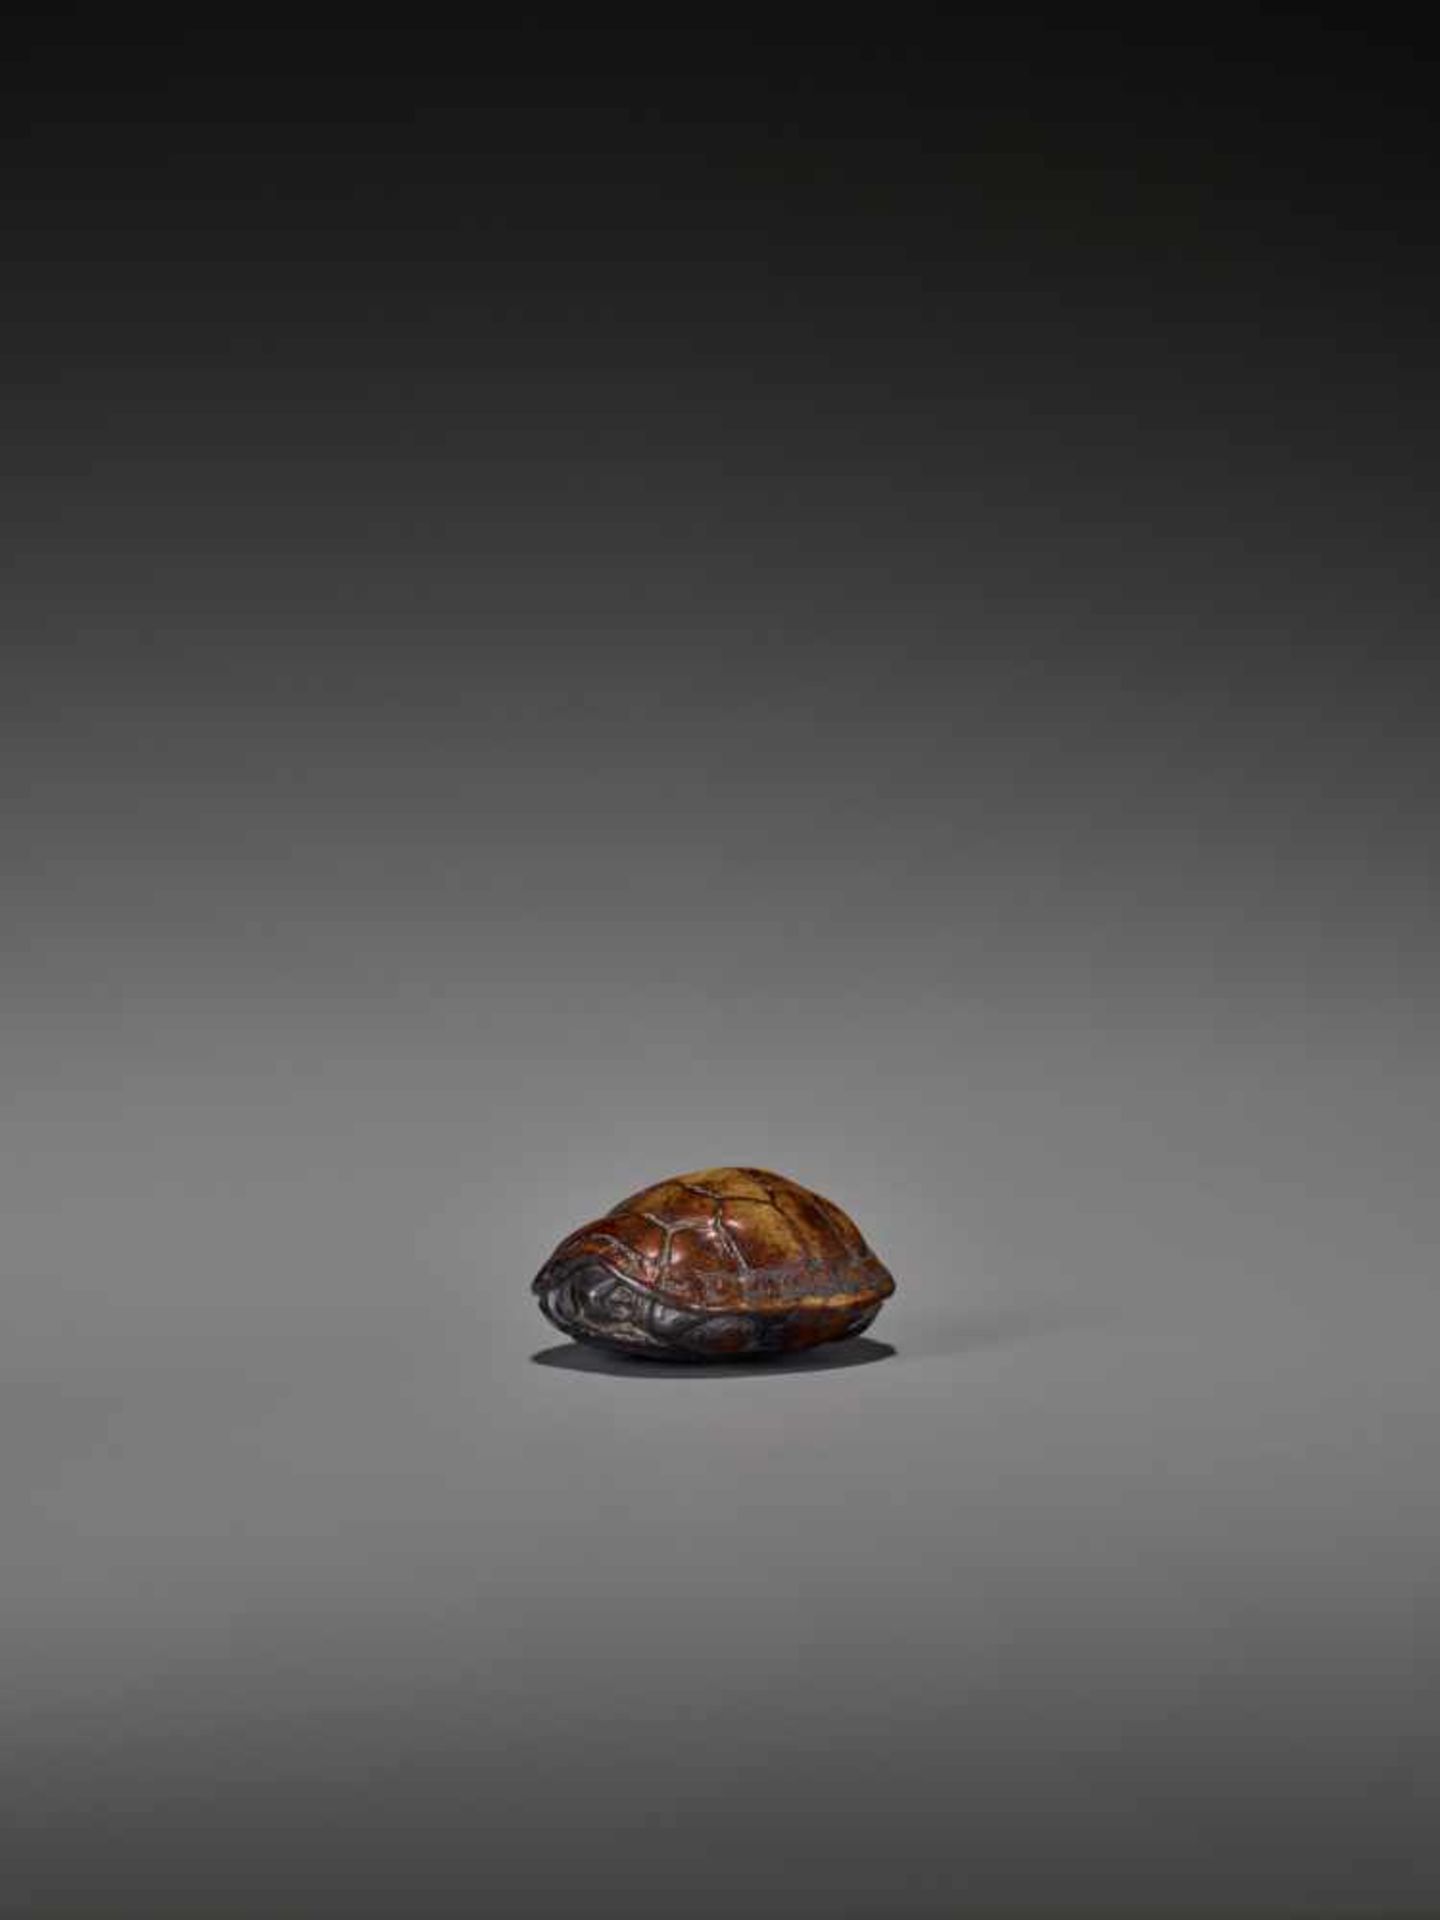 A WOOD NETSUKE OF A RETRACTED TORTOISE UnsignedJapan, 18th century, Edo period (1615-1868)This early - Bild 3 aus 10